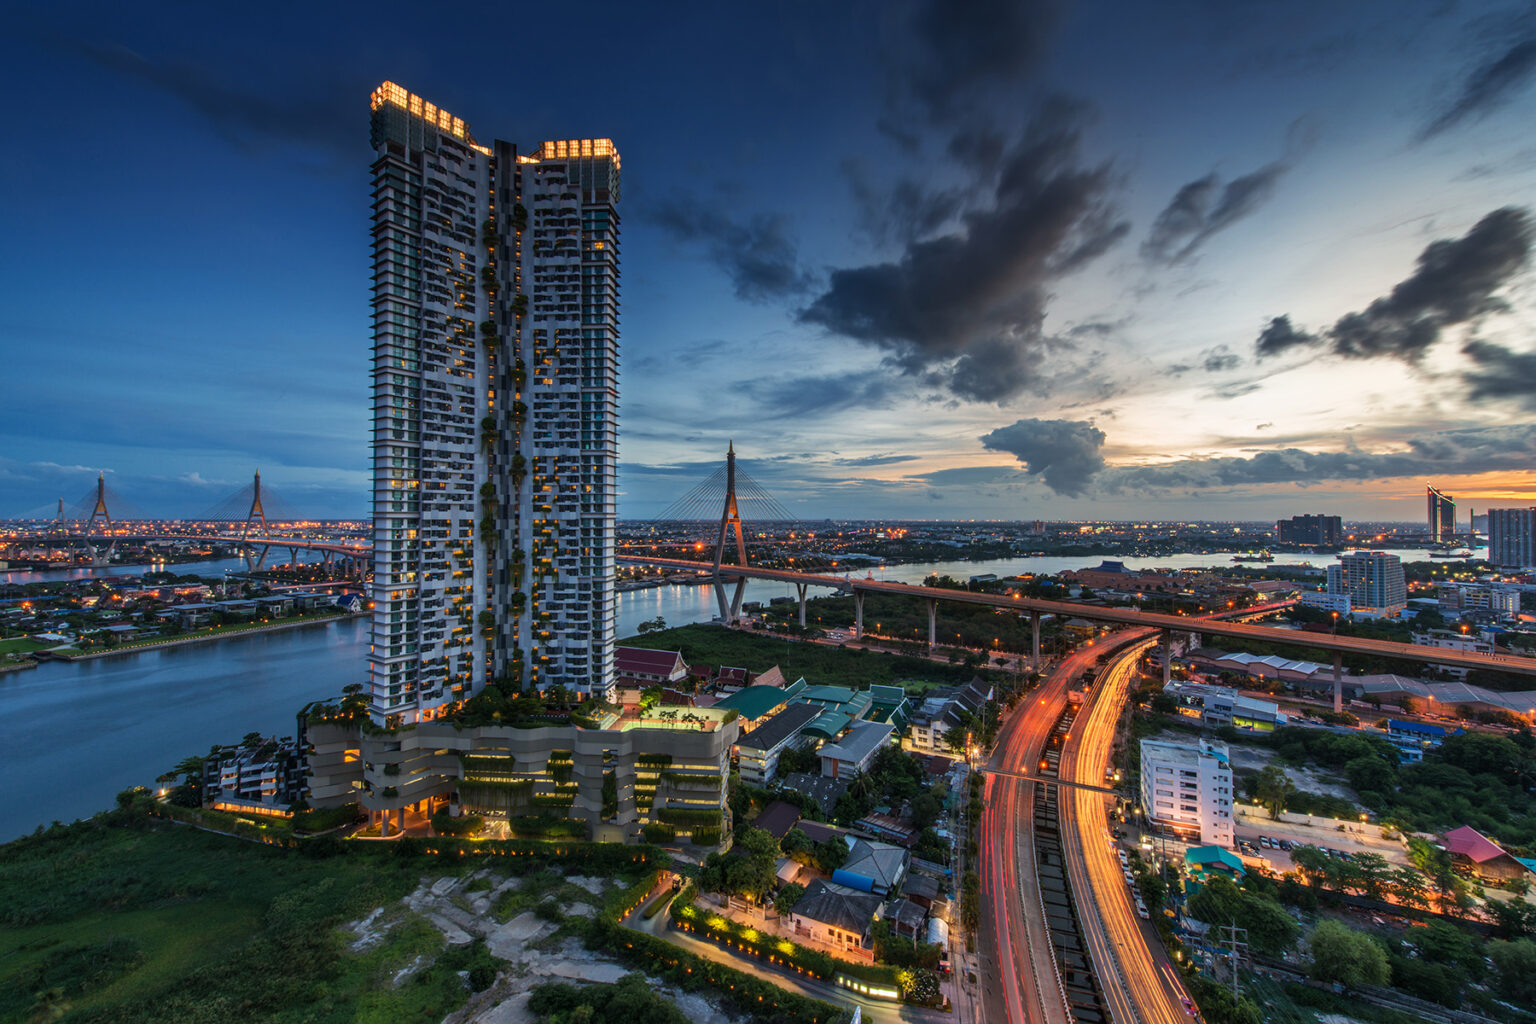 Bangkok skyline early evening, two tall high rise condominium on the left side overlooking the Bhumiphol Industrial Bridge